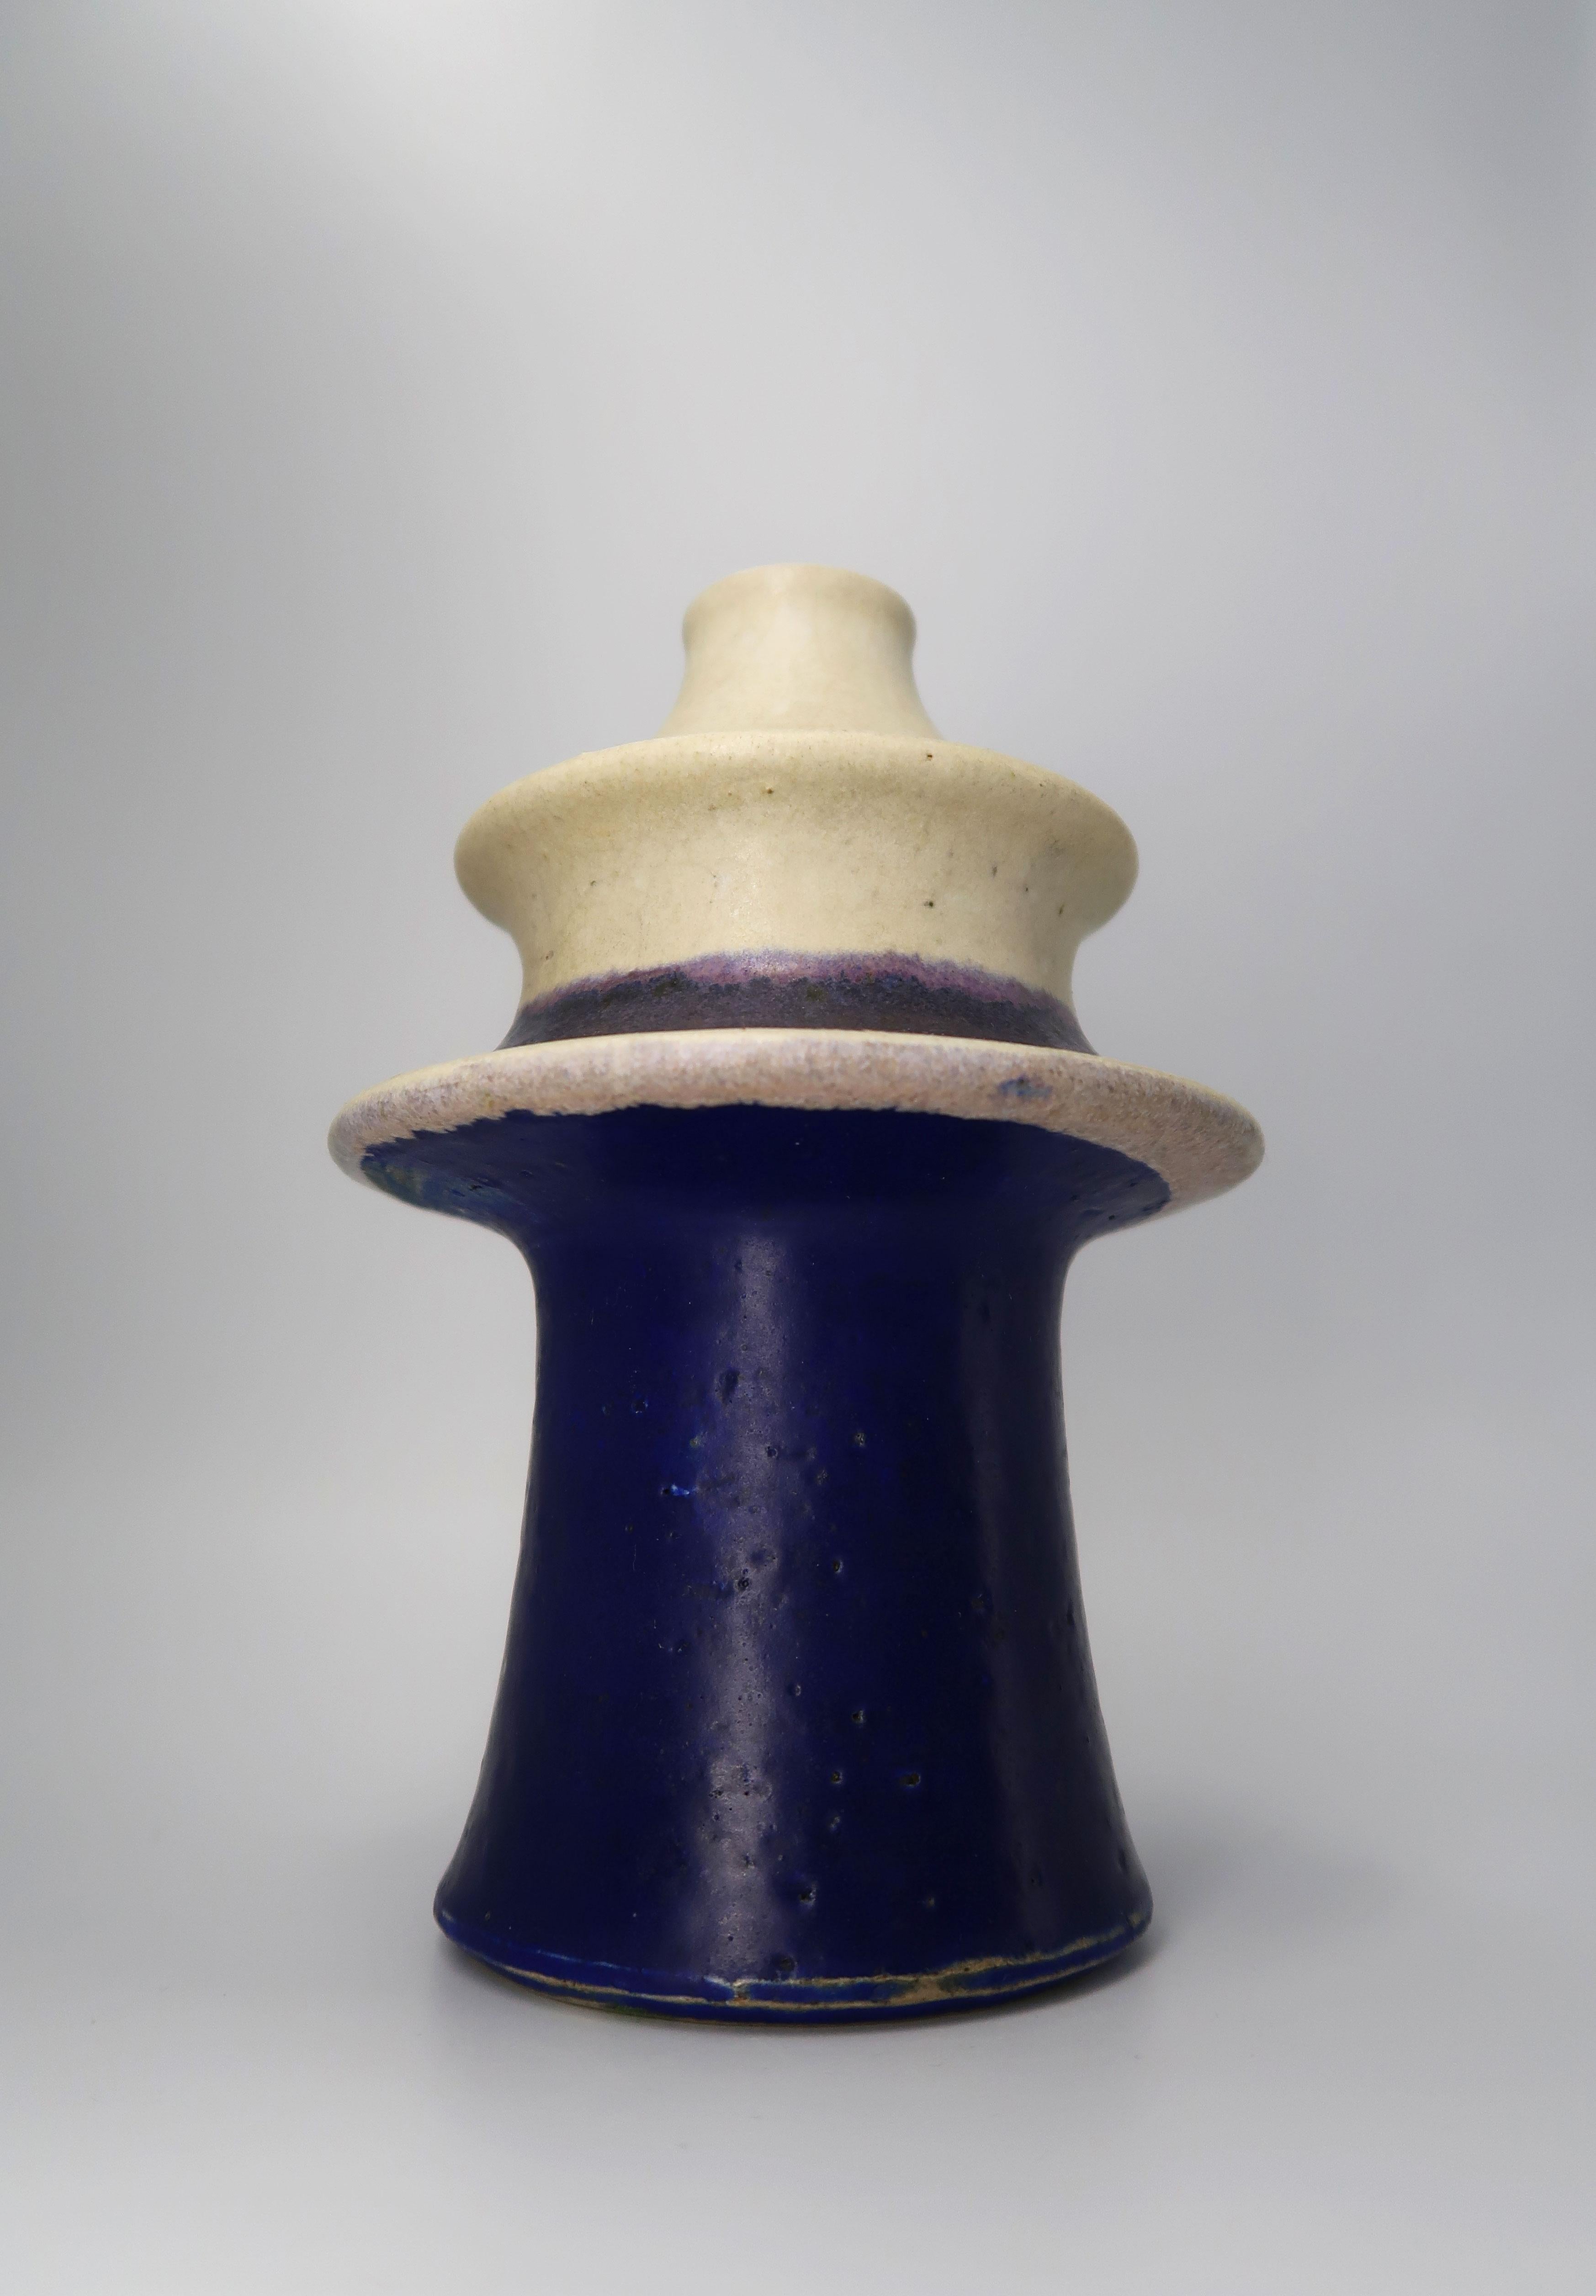 Handmade Danish Mid-Century Modern tiered ceramic vase by British ceramic artist Carl Cunningham-Cole for acclaimed Danish ceramic manufacturer Kähler. Warm beige colored glaze on top with cobalt blue glaze on the bottom and lilac, dark purple and